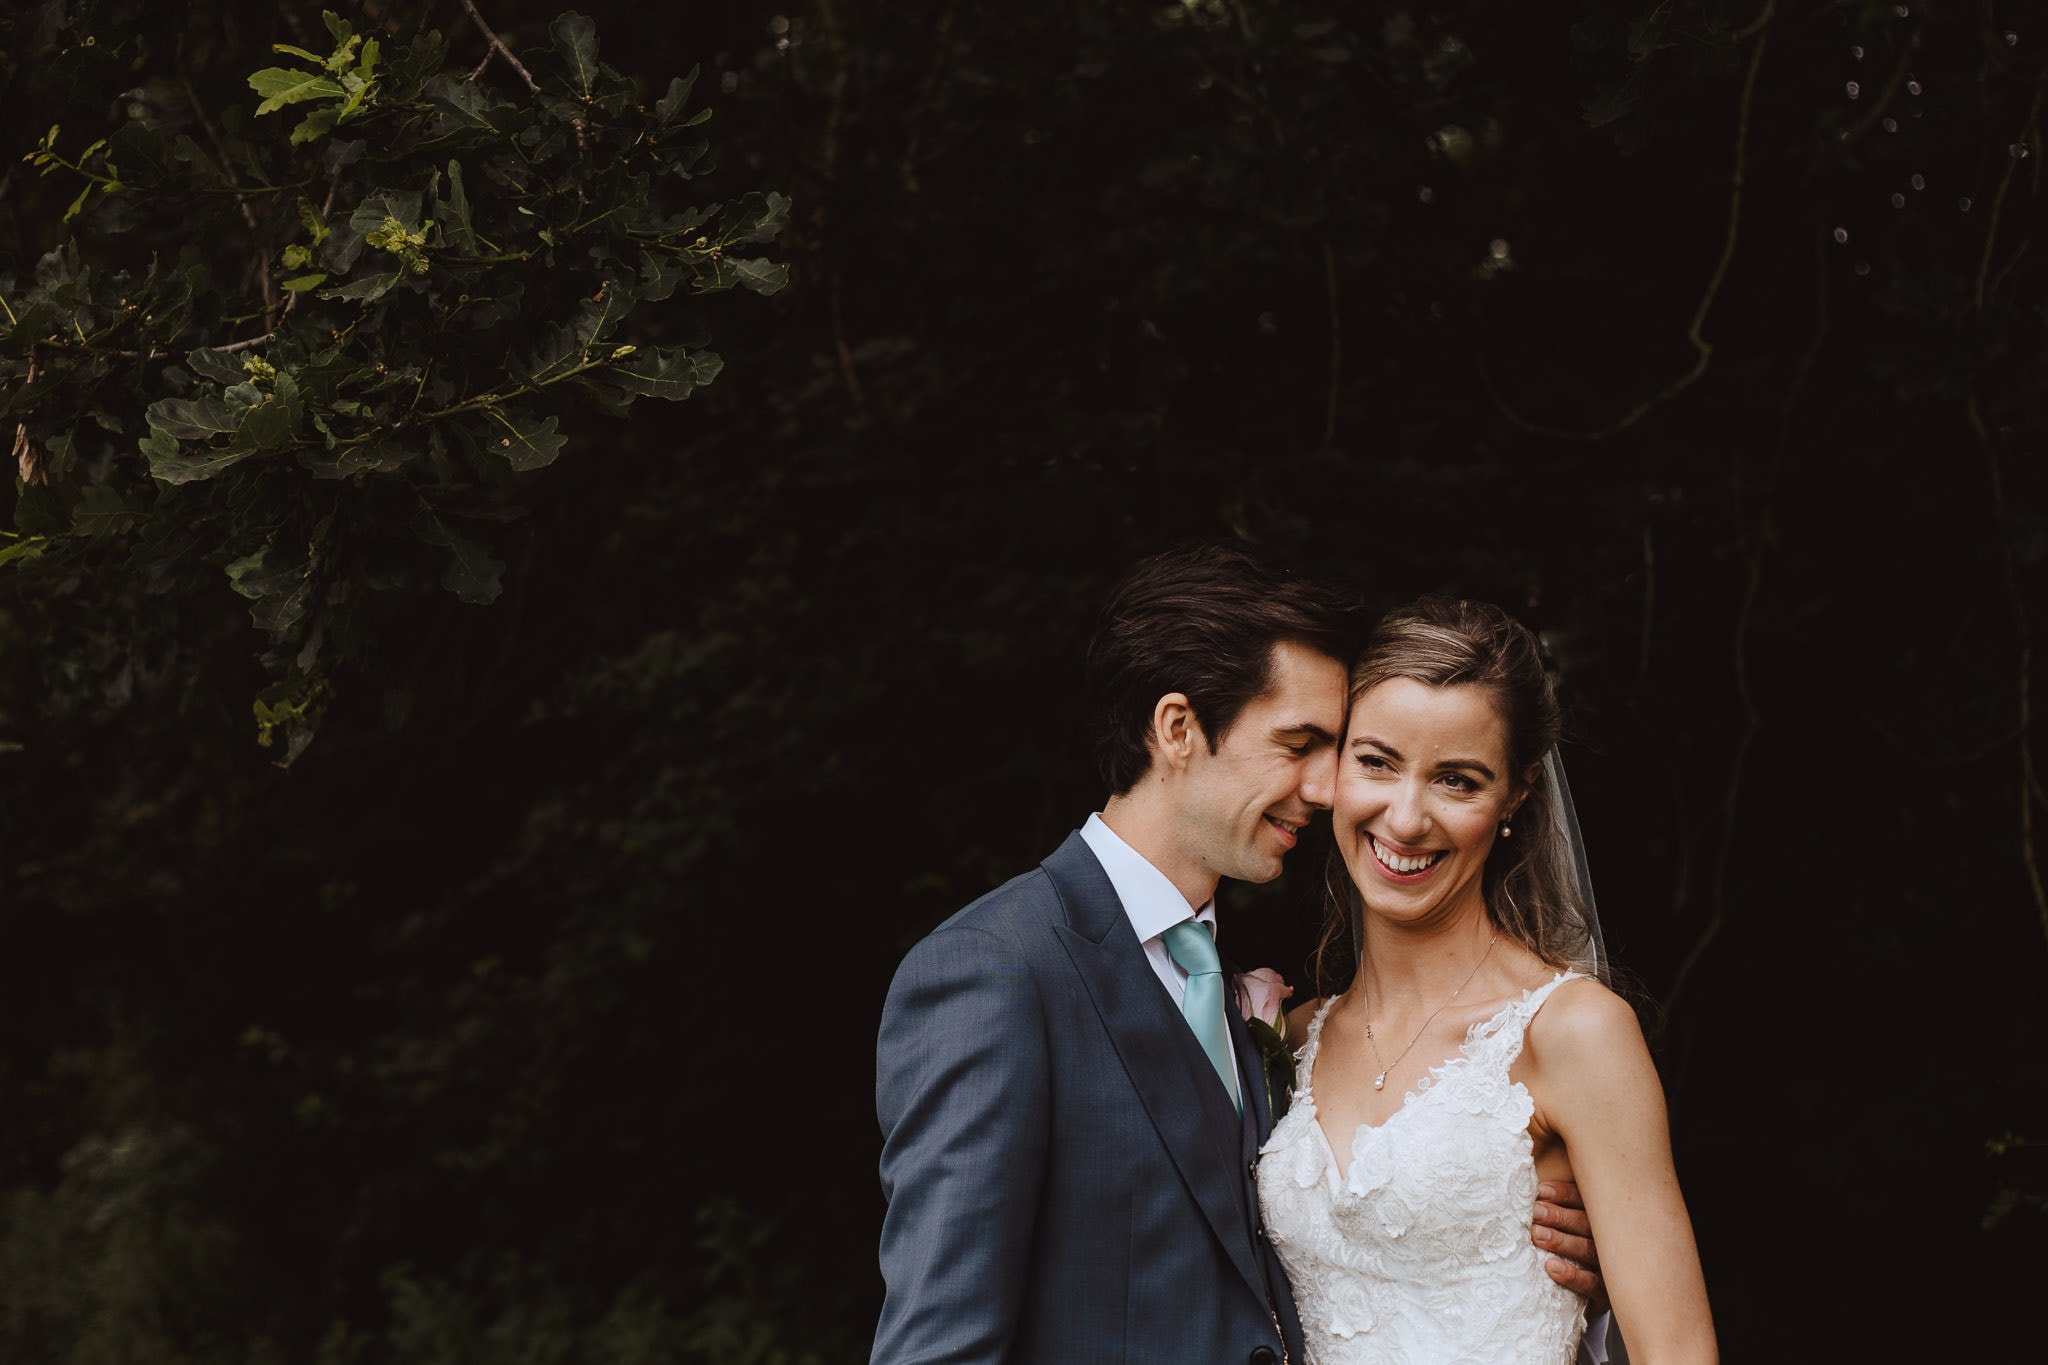 Leicestershire wedding photographer natural portrait of bride and groom